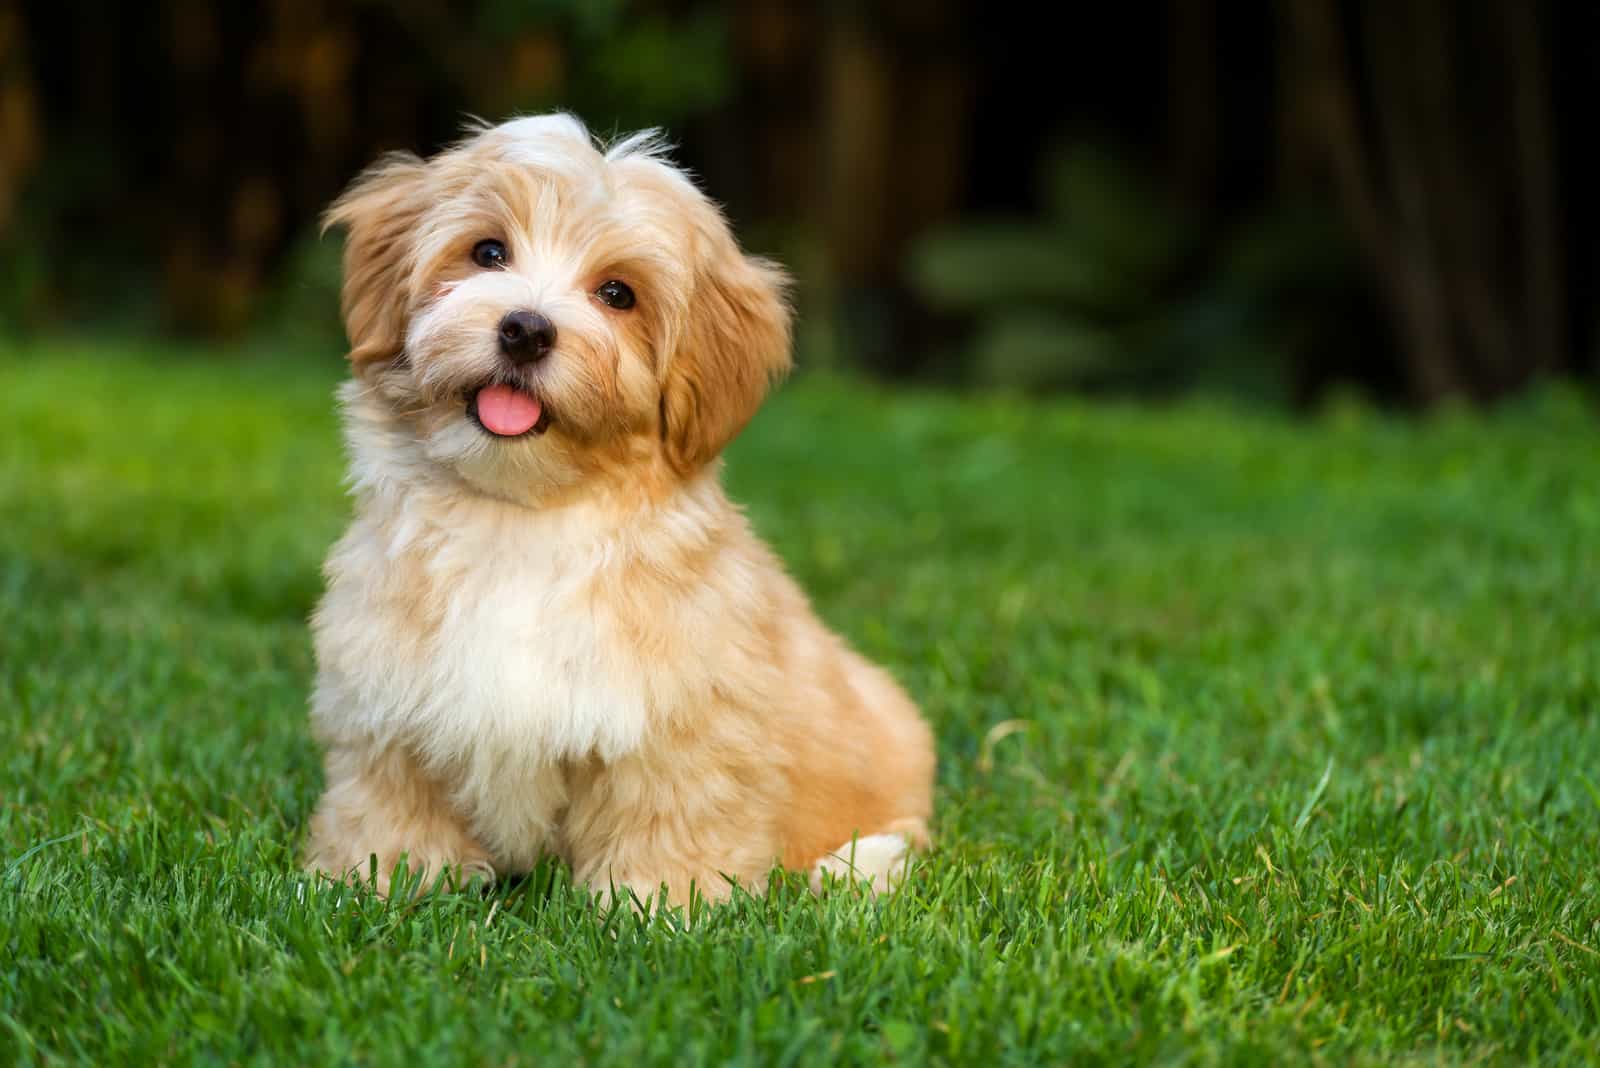 havanese puppy dog is sitting on the grass